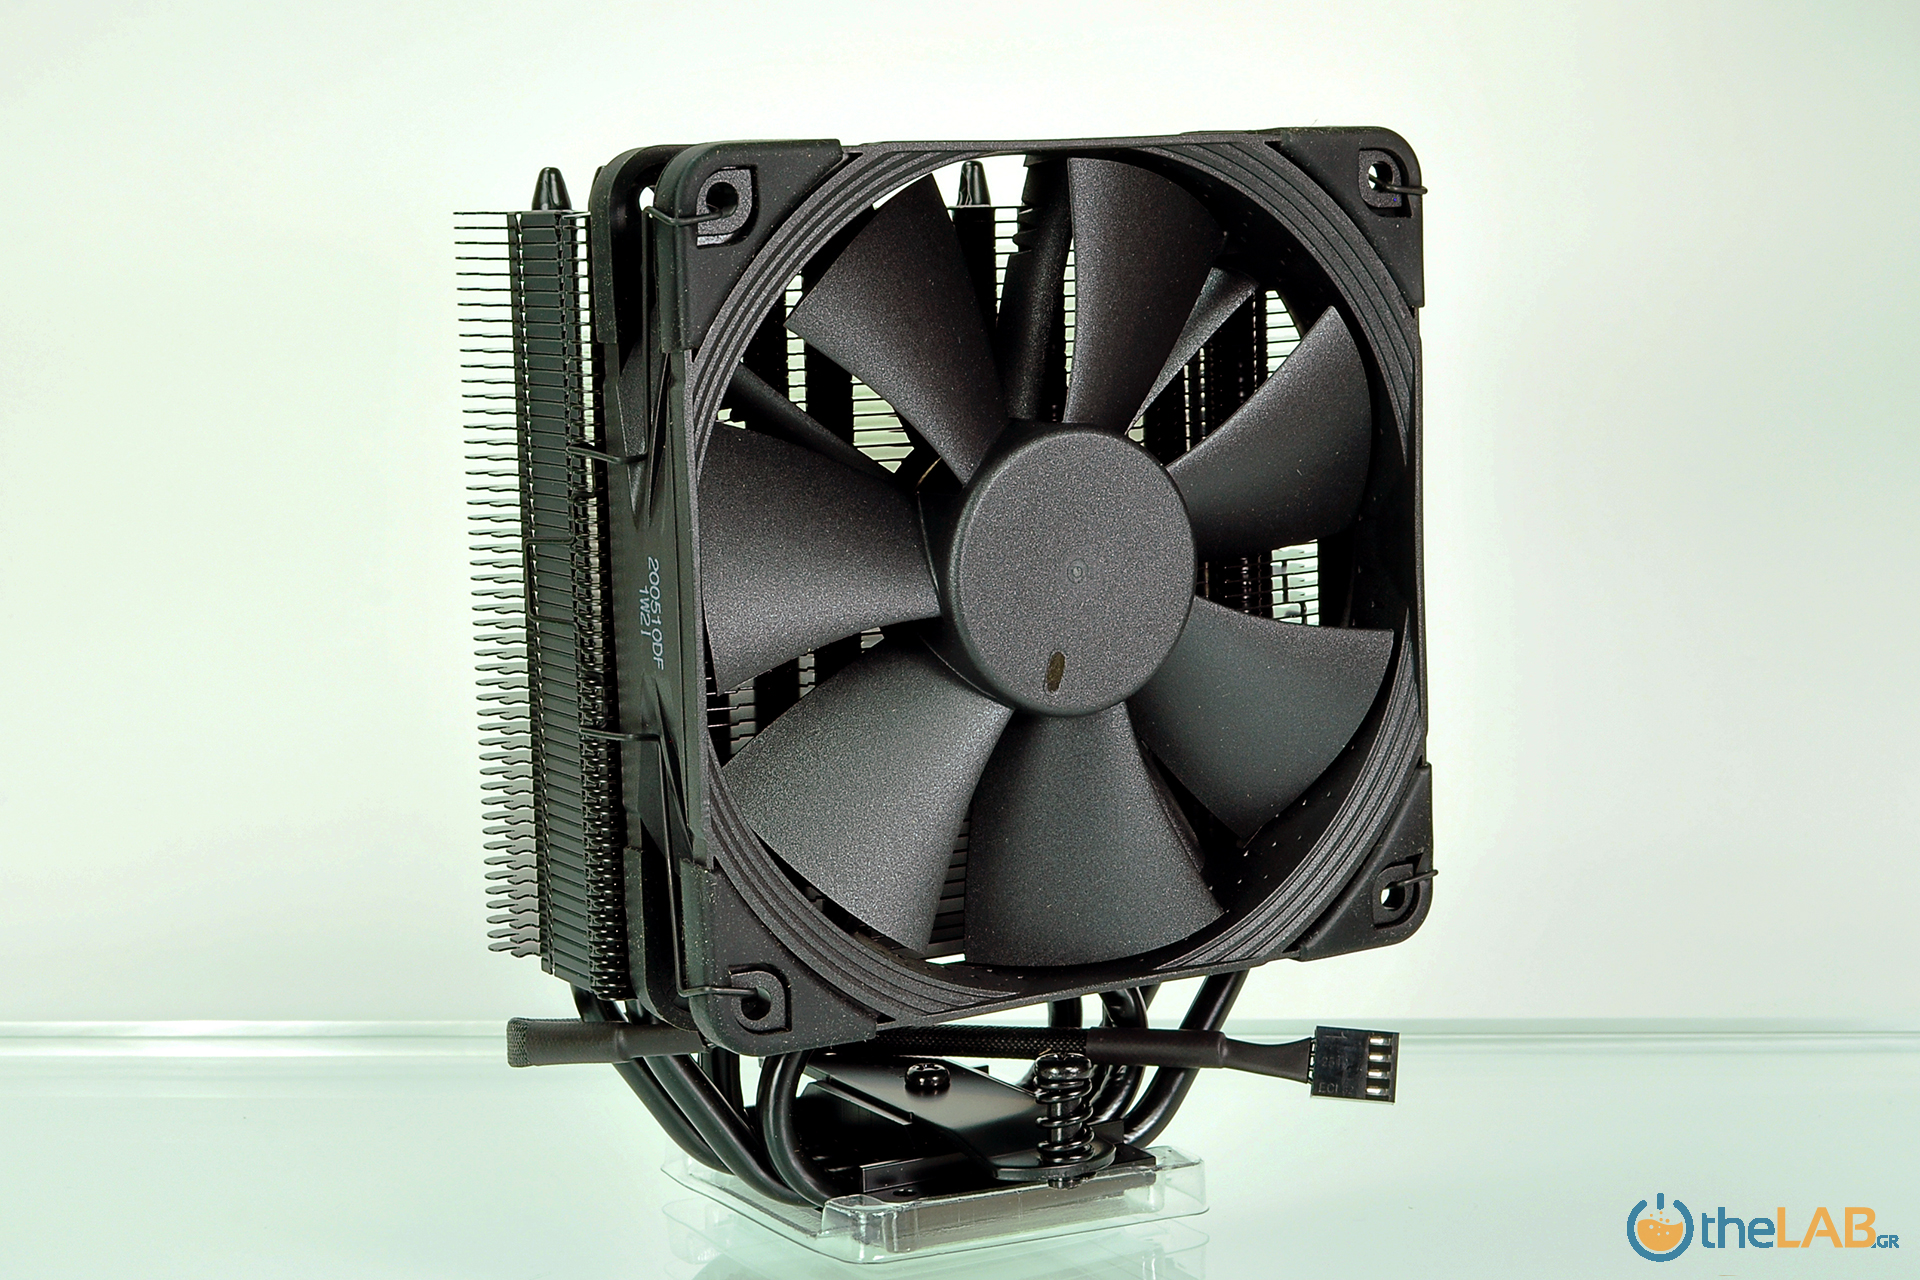 More information about "Noctua NH-U12S chromax.black _ All Black Single Tower CPU Cooler Review"